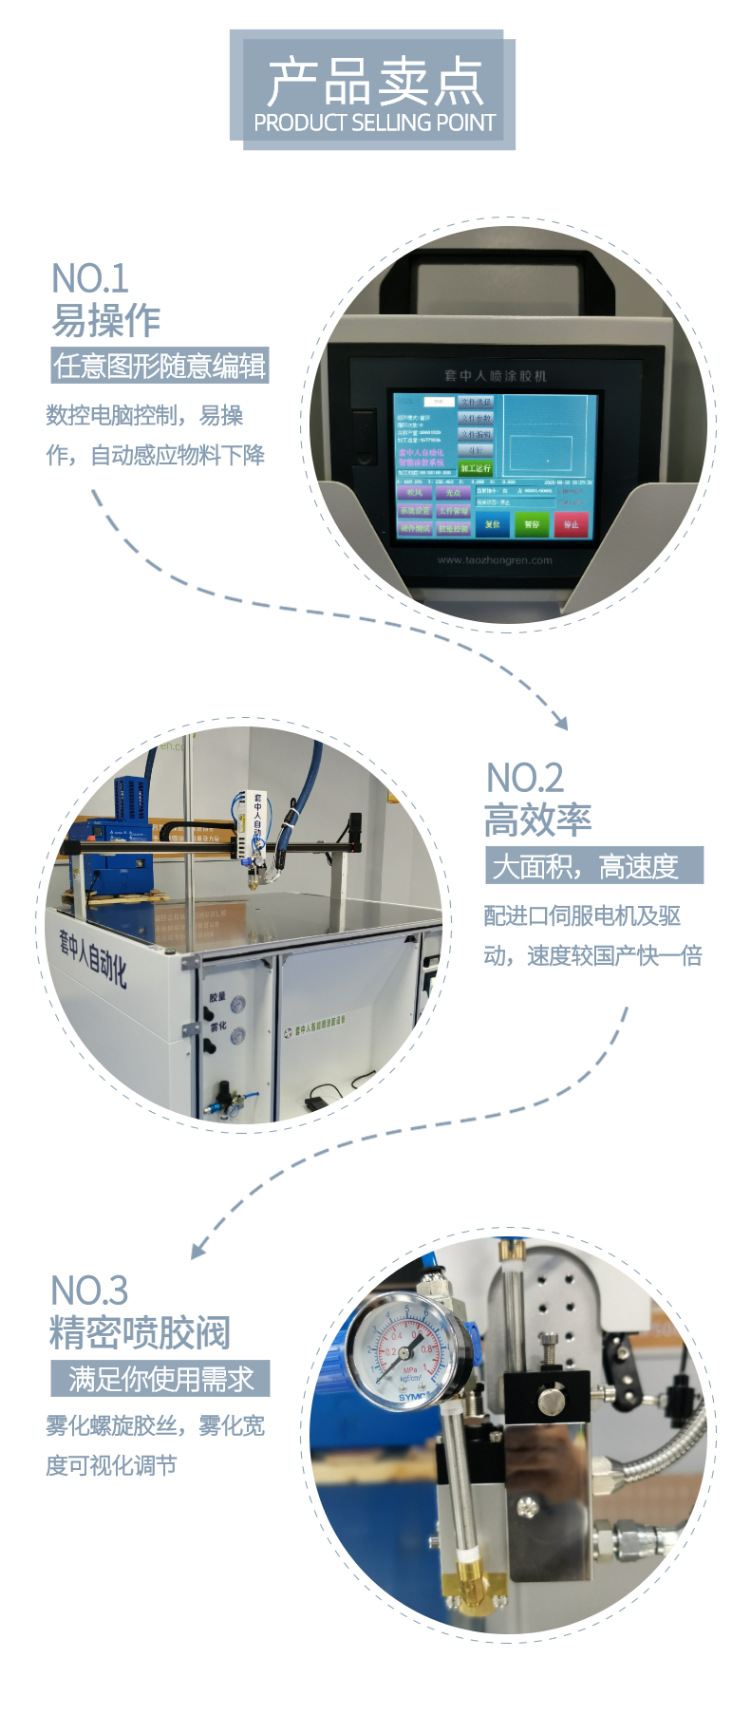 Manufacturer of adhesive brushing machine for surgical clothes in sets - White latex spiral pattern adhesive spraying machine - Intelligent adhesive machine